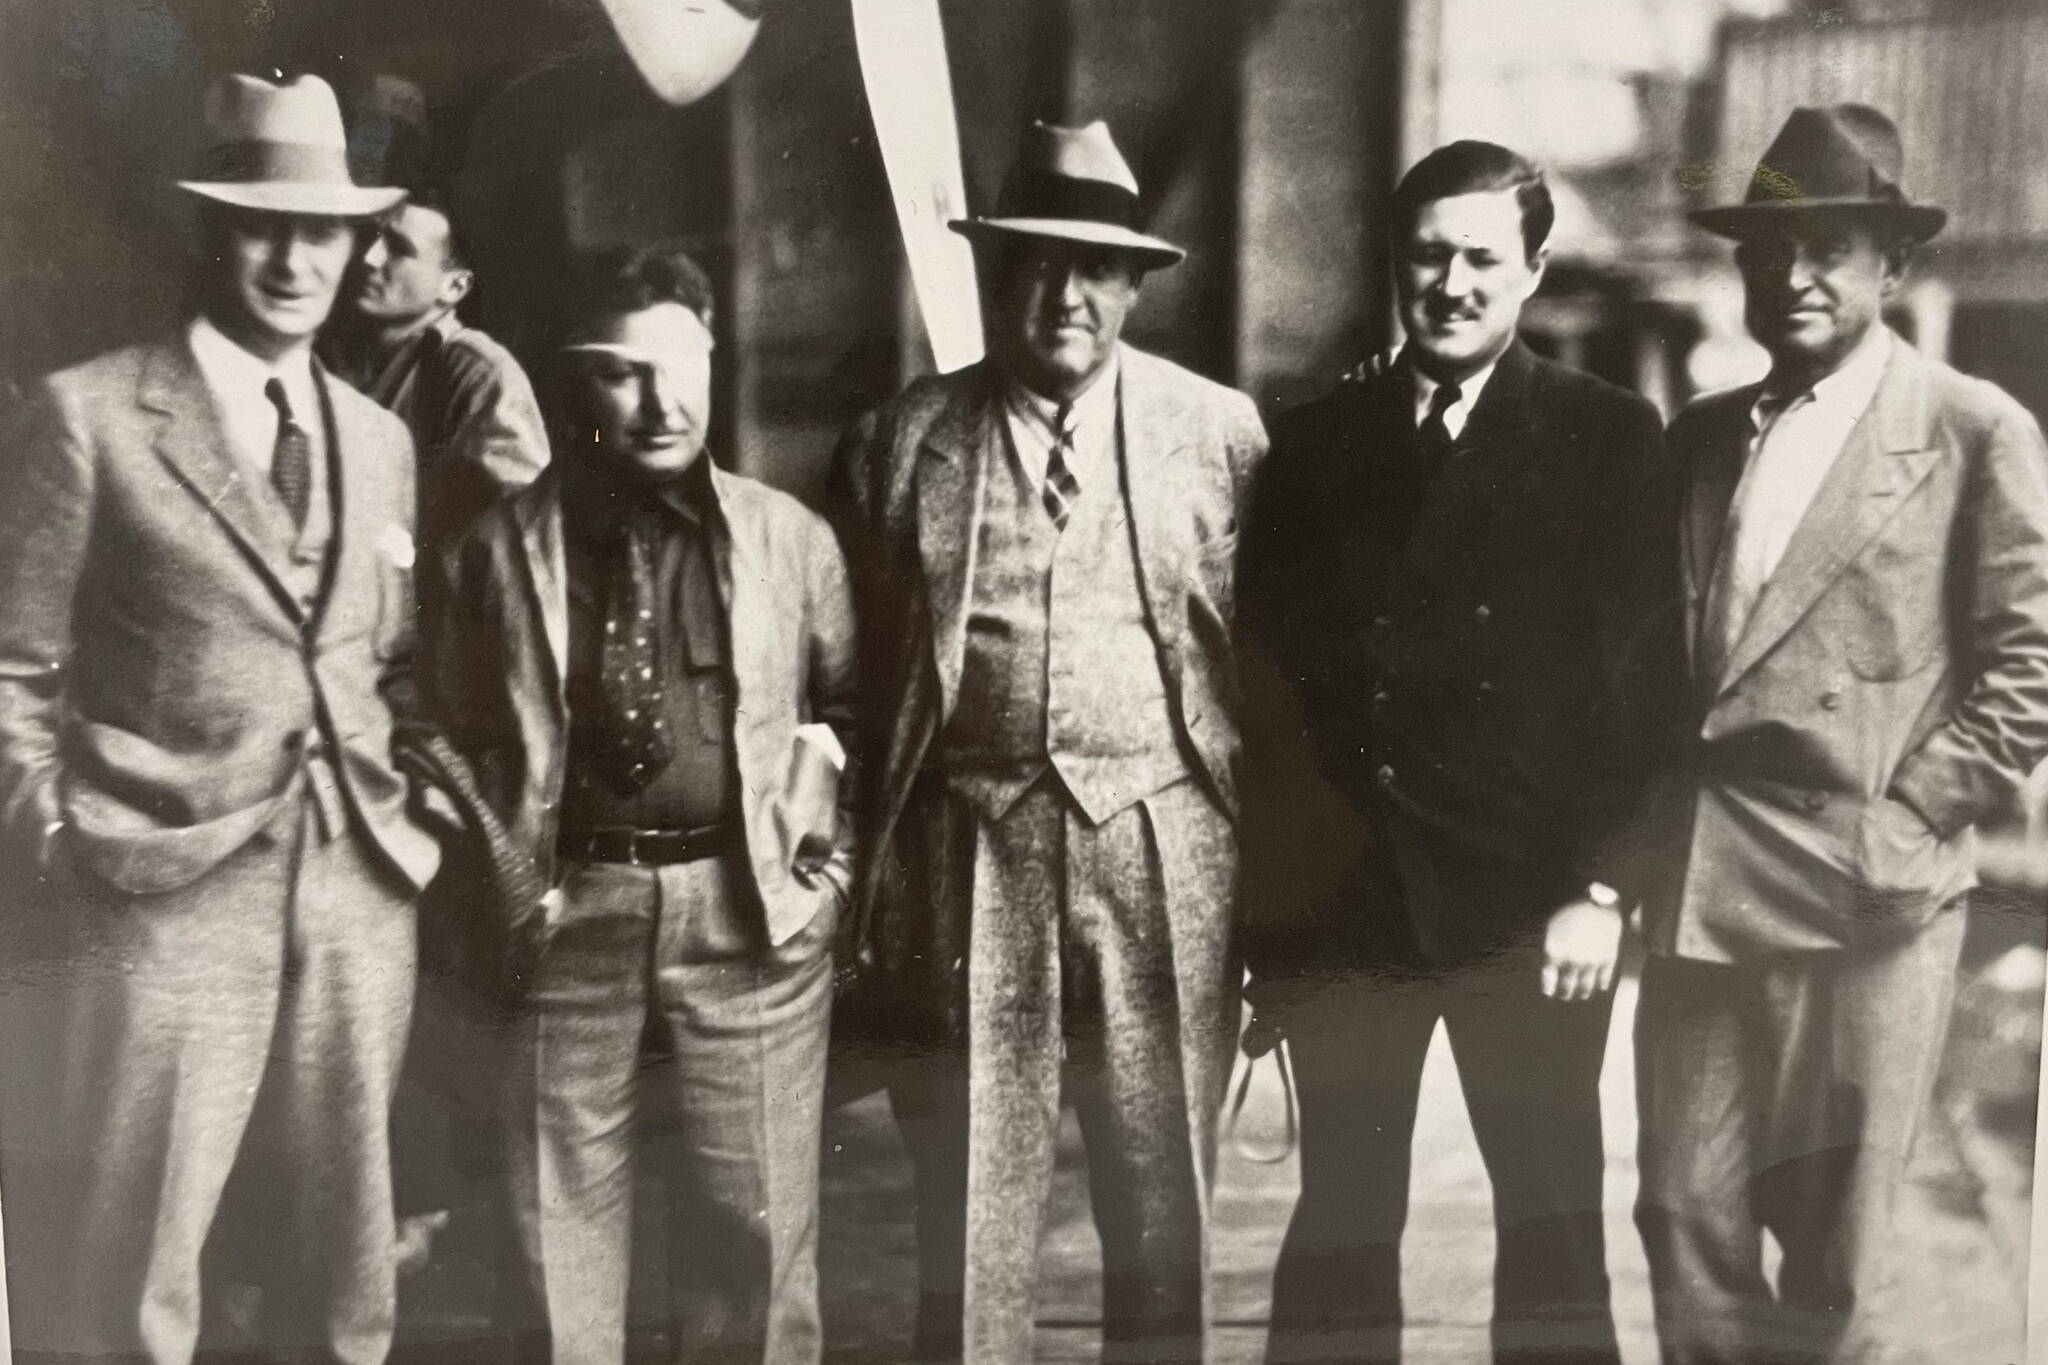 Five famous men stand together on a floatplane hangar deck on Aug. 8, 1935. From left to right: Juneau Mayor Izzy Goldstein, Pilot Wiley Post, Novelist Rex Beach, Pilot Joe Crosson, and “Cowboy Philosopher” Will Rogers. (Alaska State Library Ordway photo PCA-87-2631)